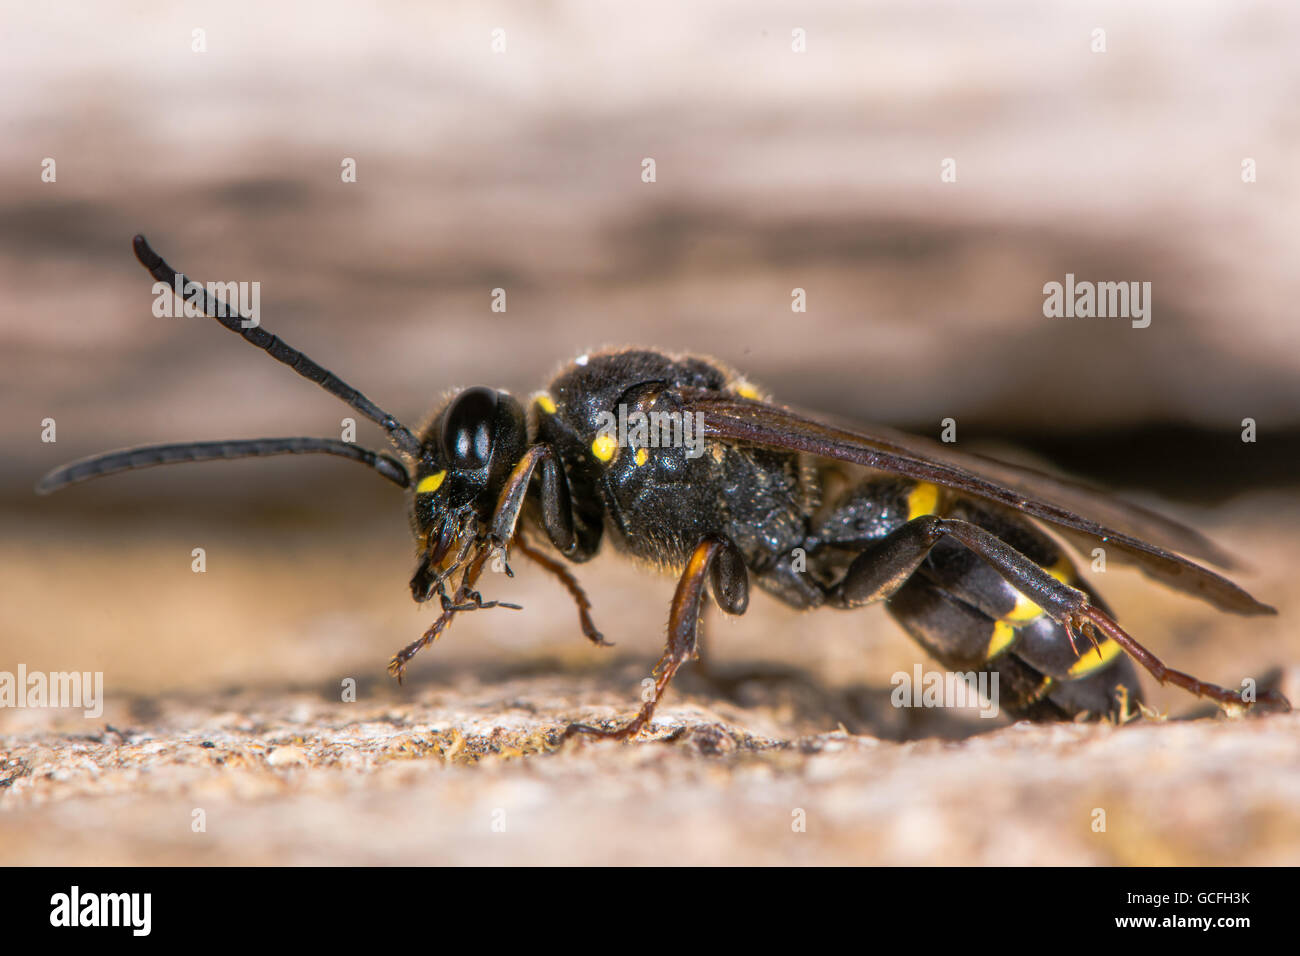 Digger wasp (Argogorytes mystaceus) preening. Black and yellow insect in the family Crabronidae, cleaning front legs with mouth Stock Photo